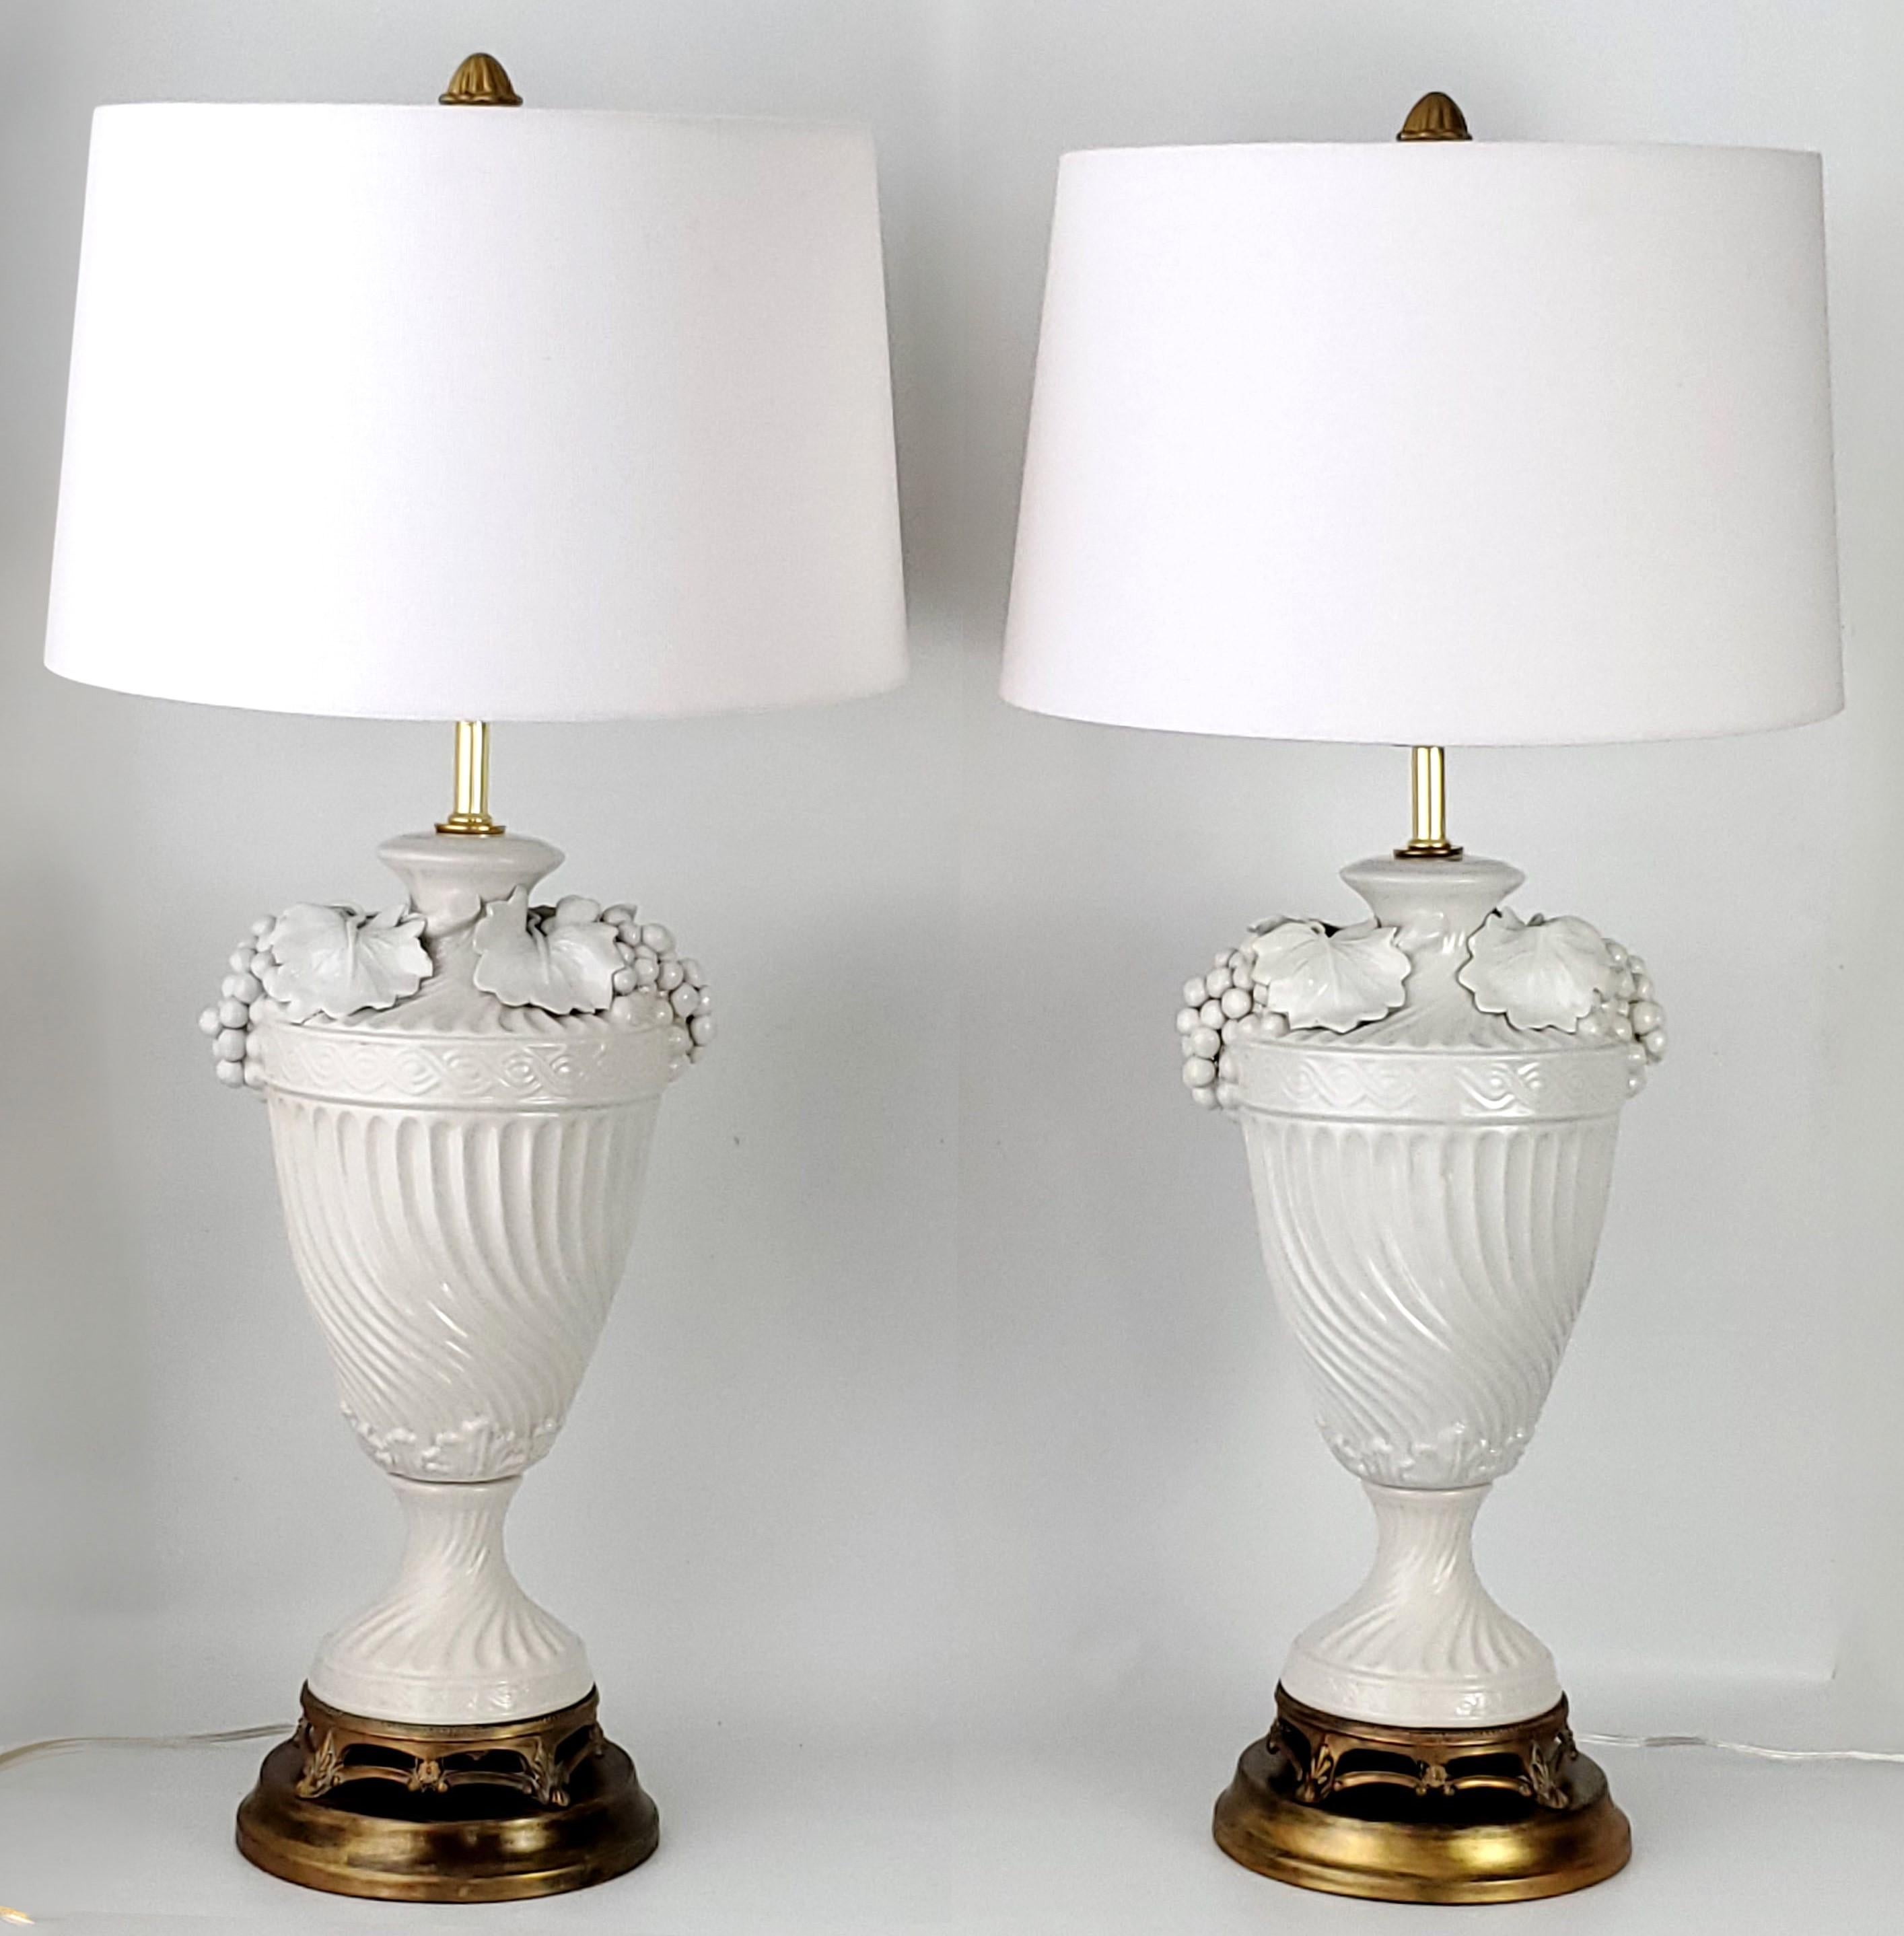 20th Century Pair Blanc De Chine Italian White Porcelain Urn Table Lamps with Grape Leaves For Sale